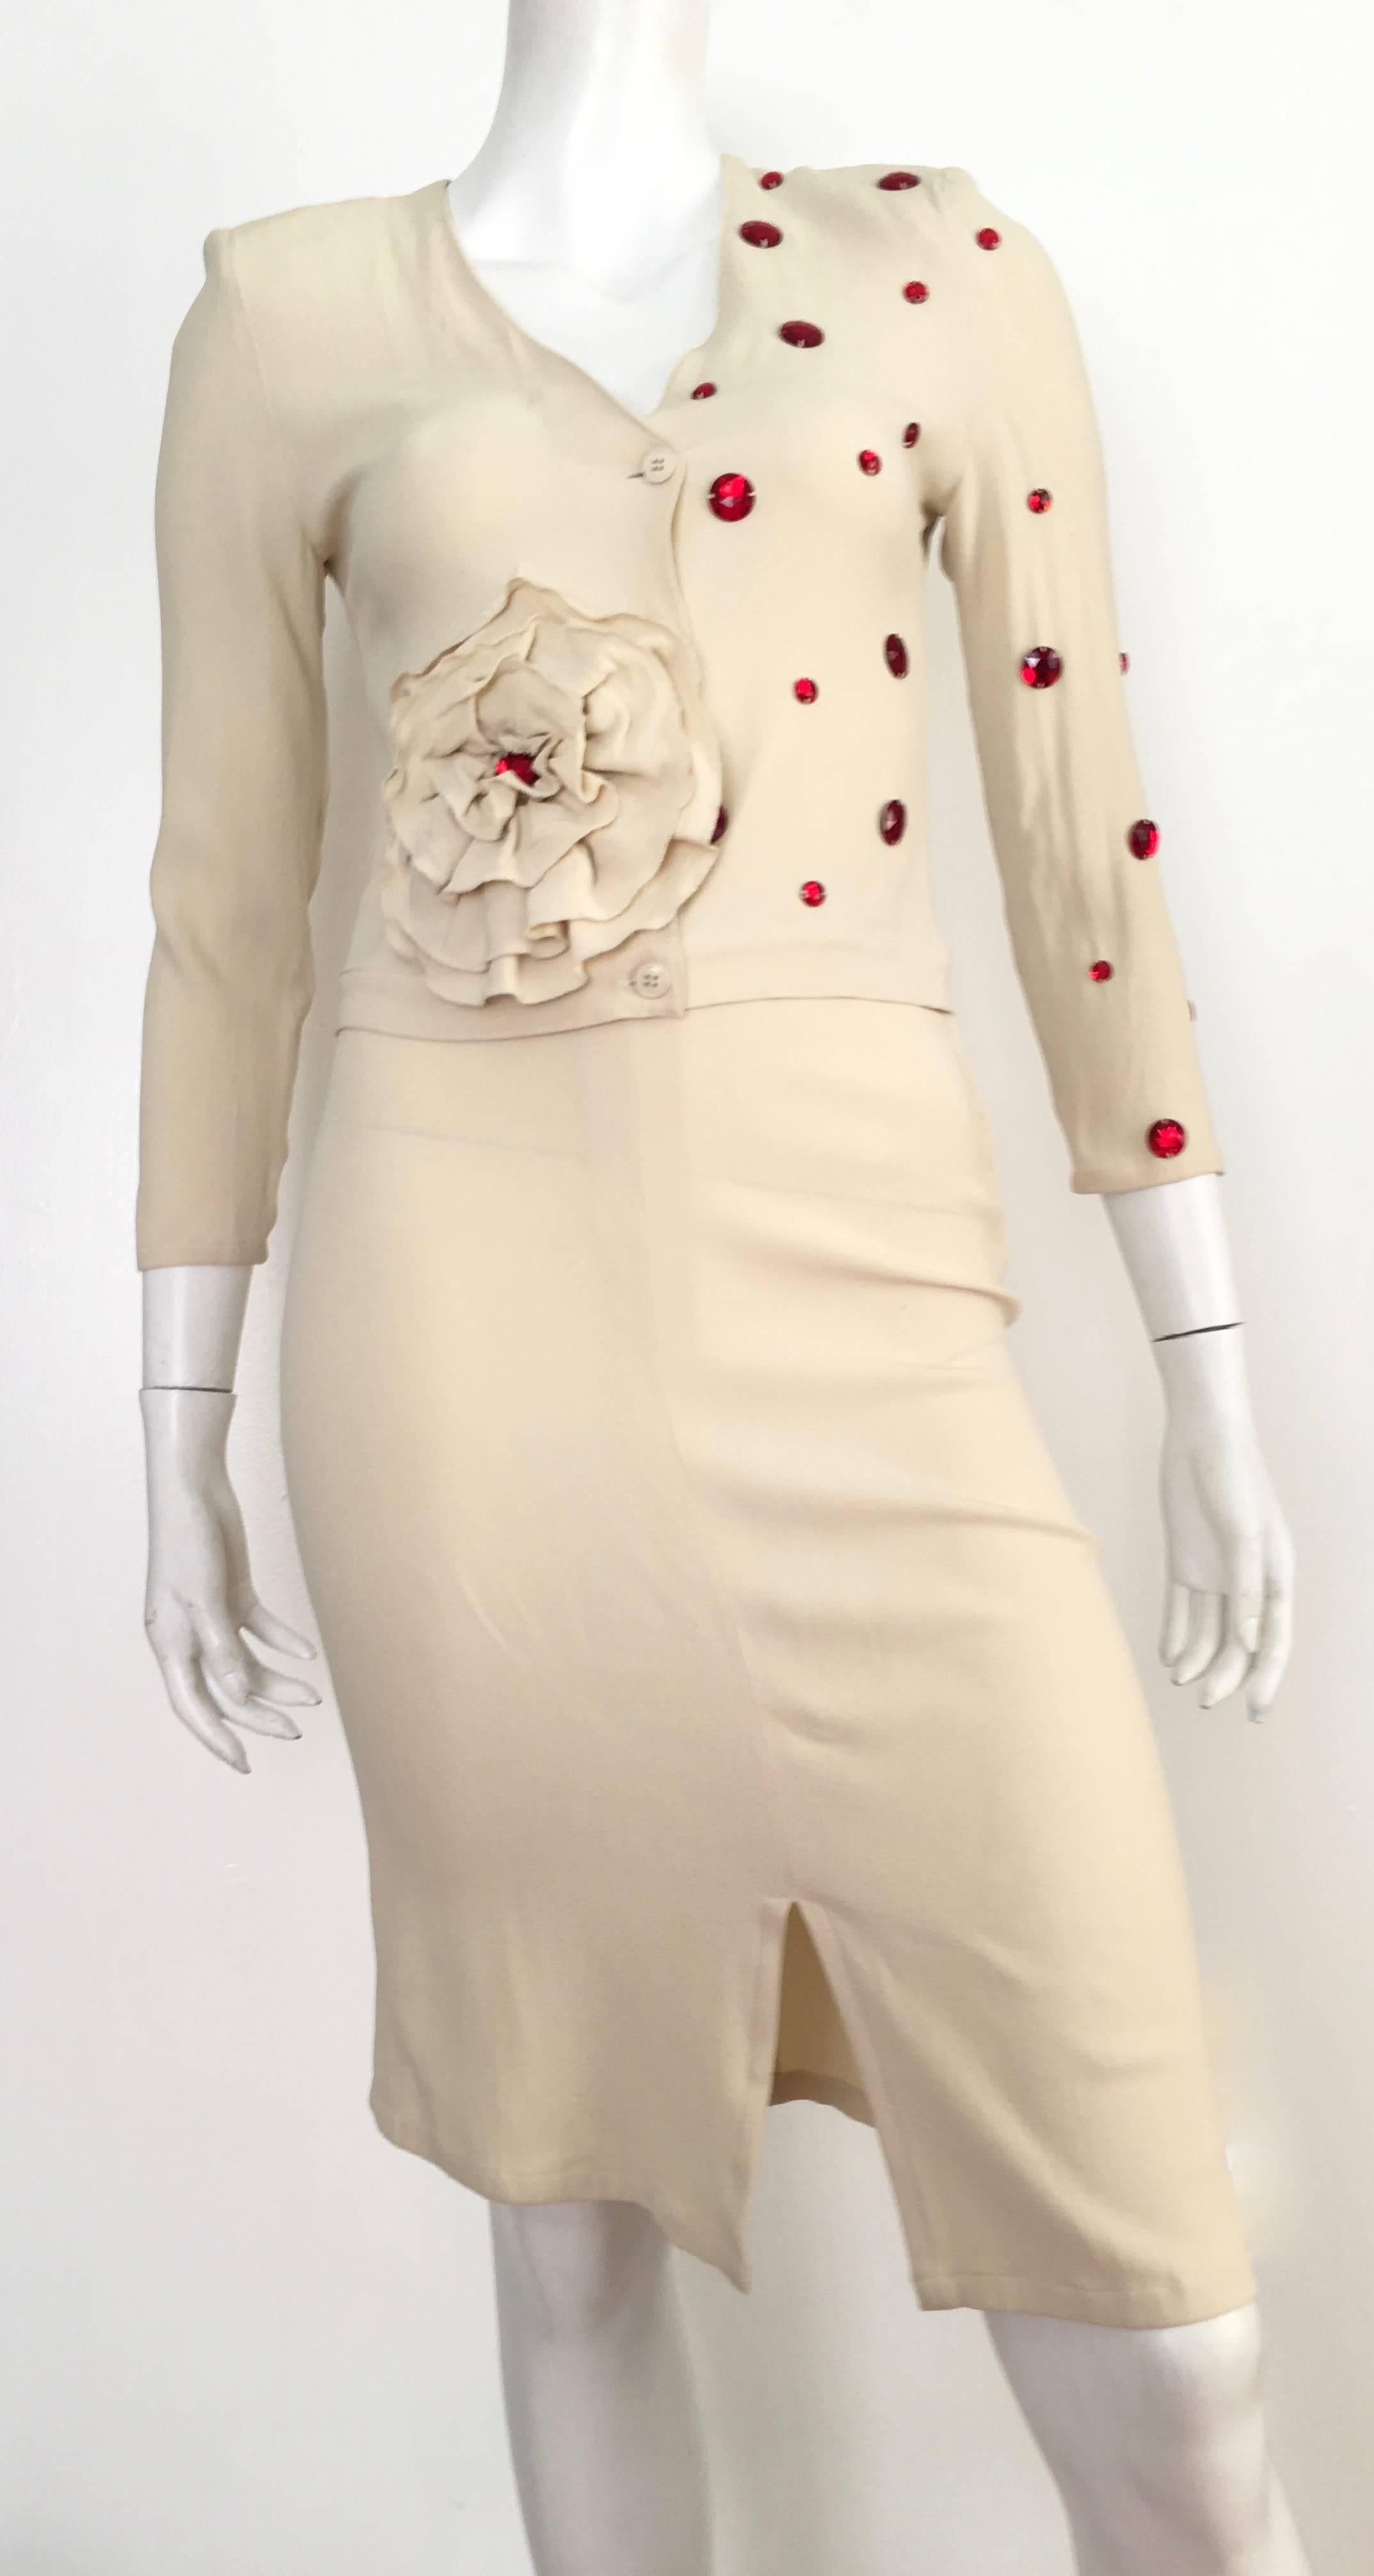 Sonia Rykiel 1980s Cream Skirt Suit with Red Rhinestones Size 4.  For Sale 5